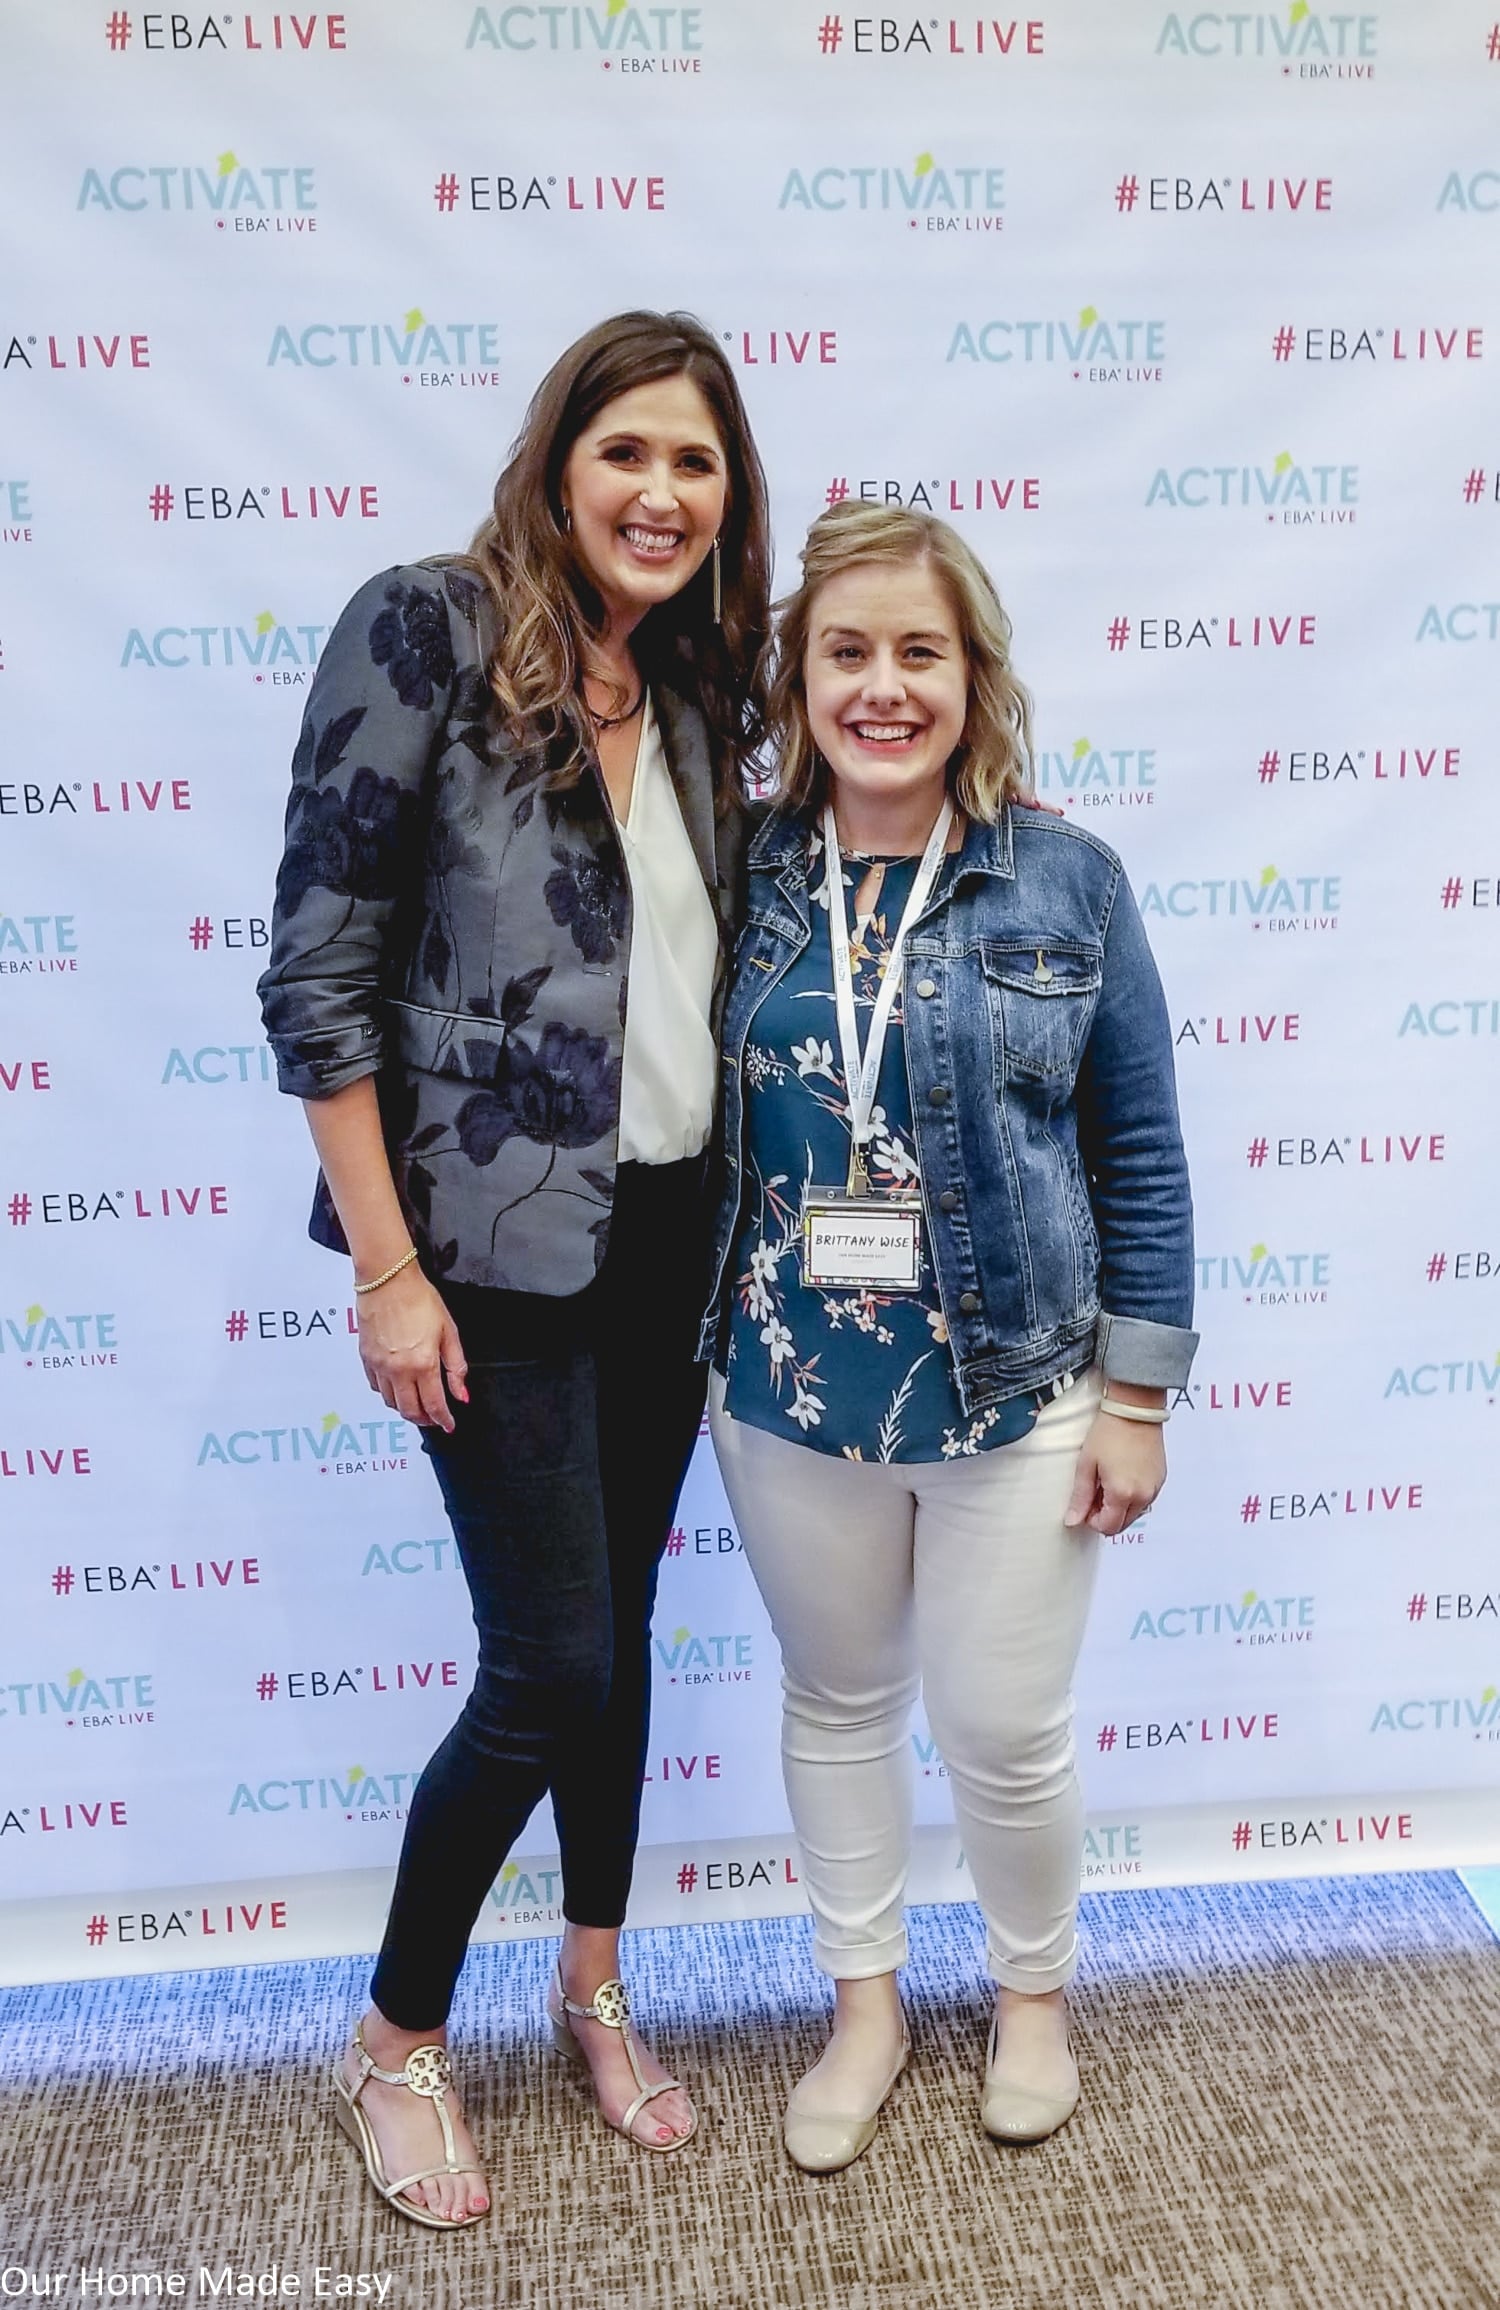 Brittany with Living Well Spending Less founder Ruth Soukup at EBA Live